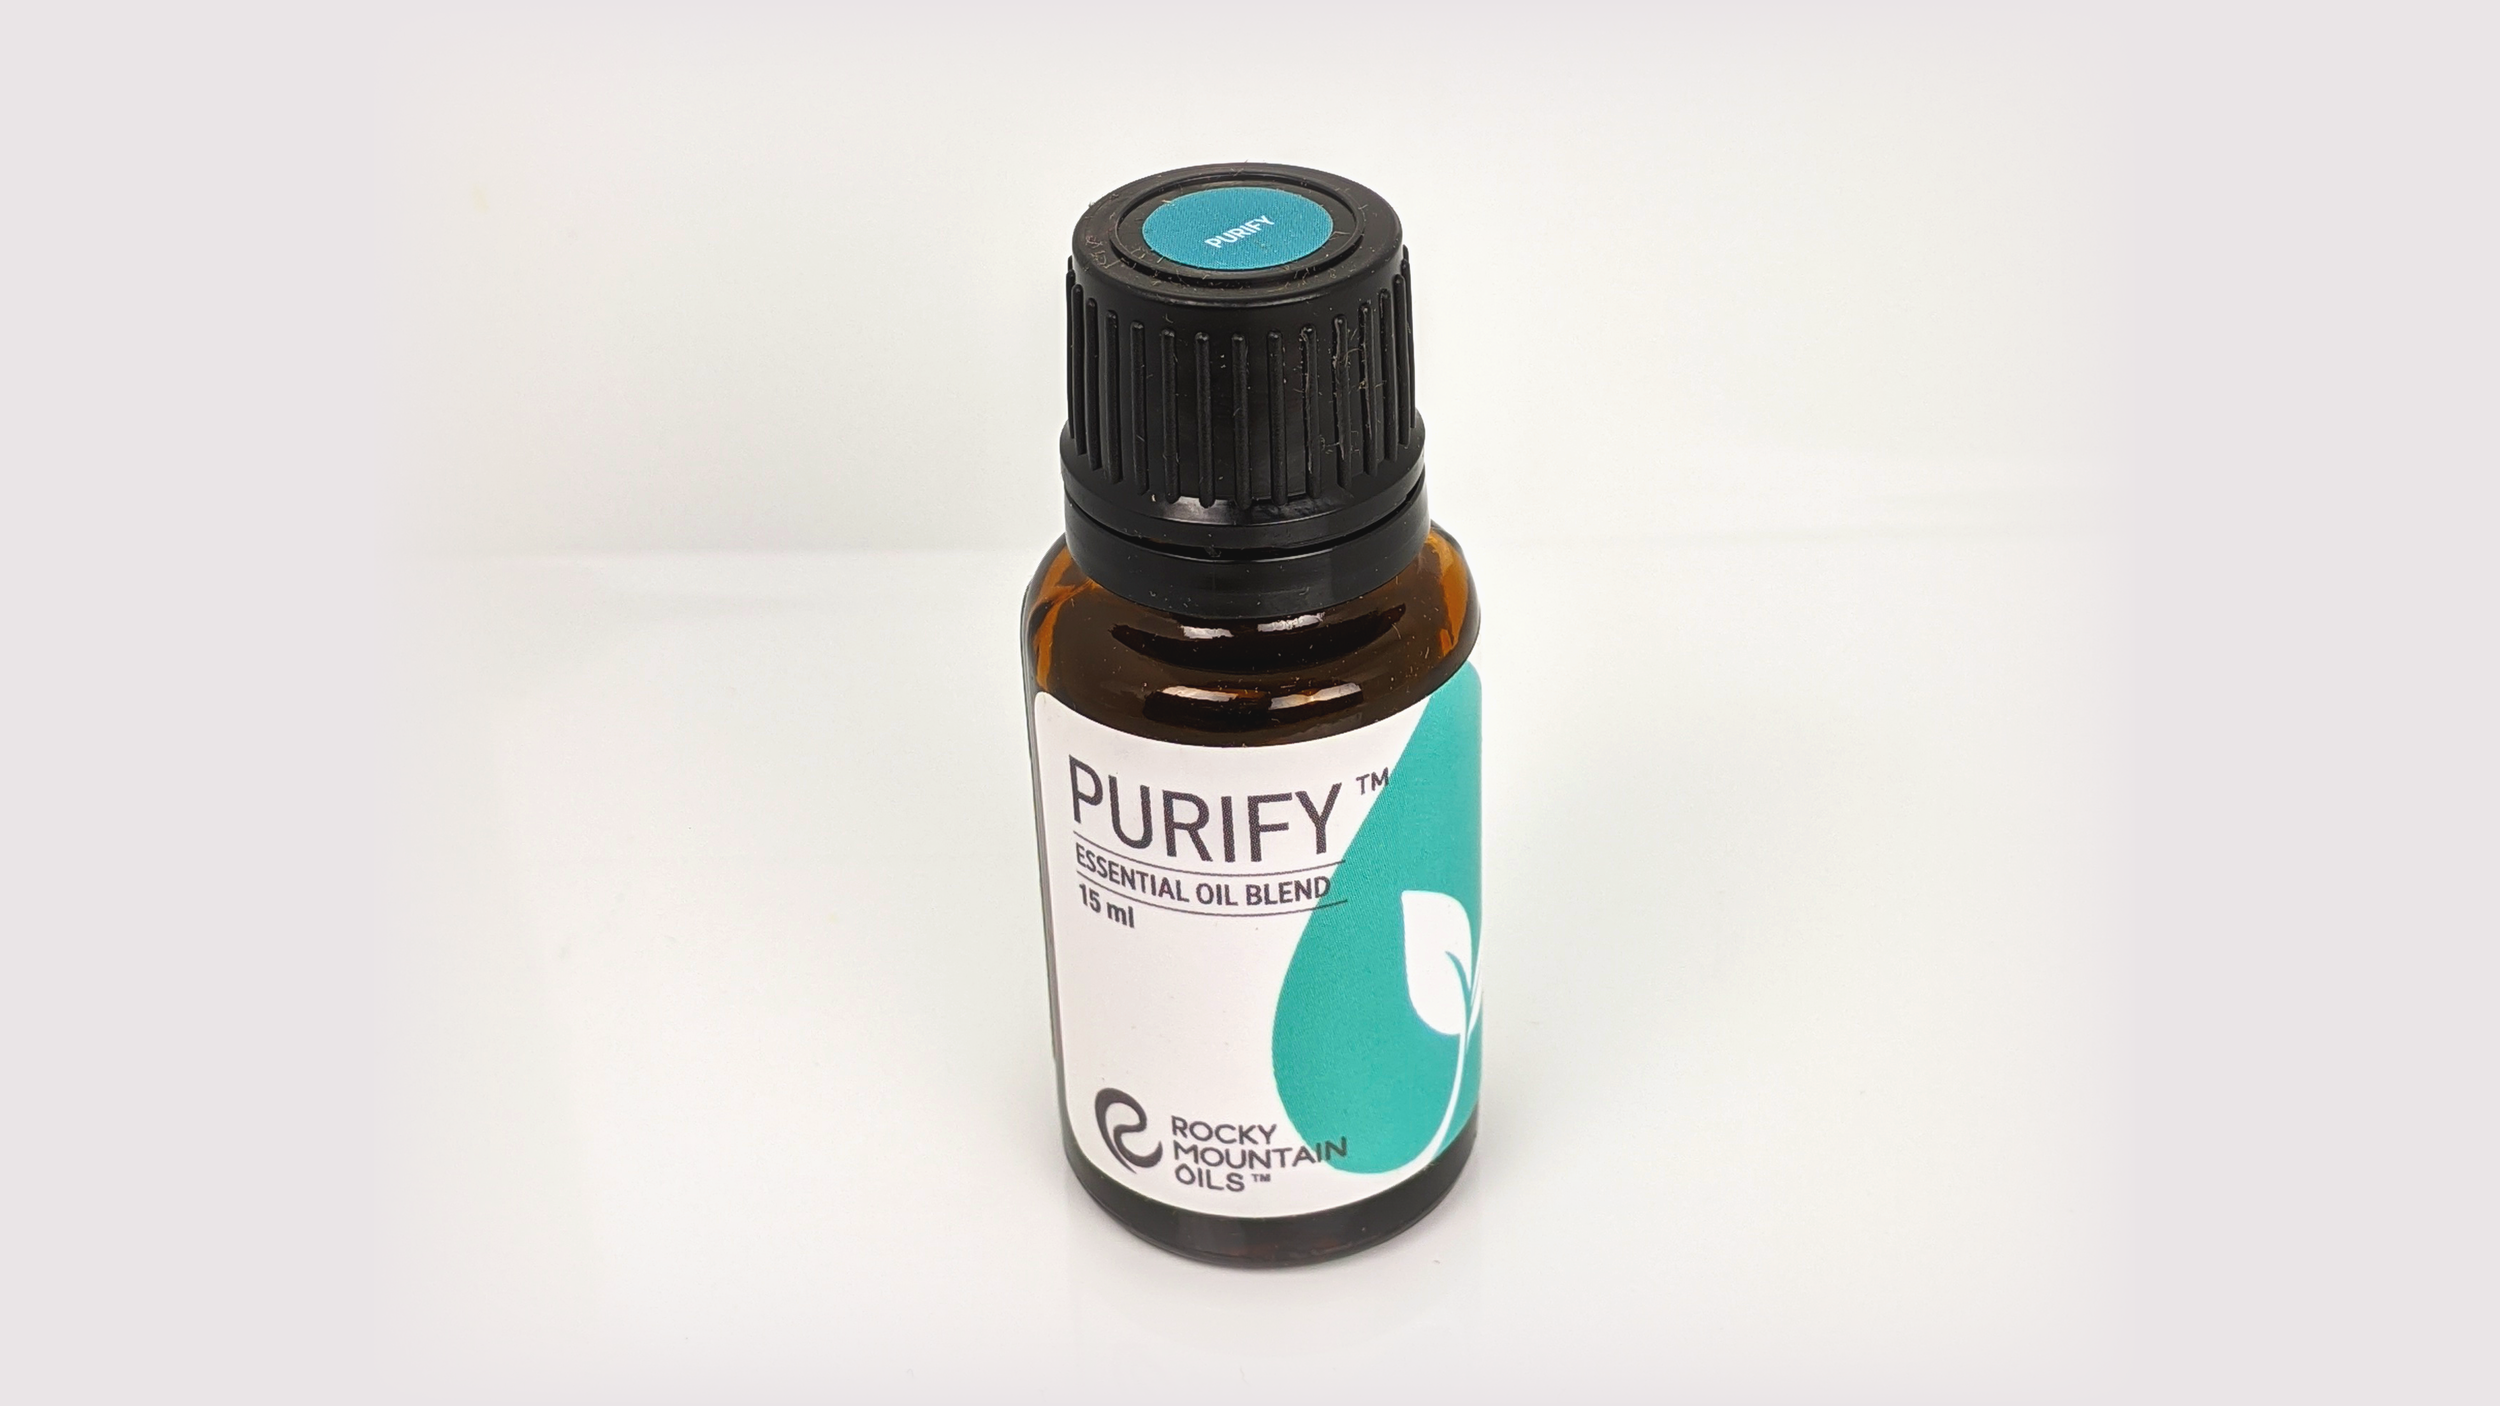 I have dogs, so RMO’s  Purify  is my #1 essential oil of choice for freshening up carpets and rugs around the home. The scent smells clean, perfectly combating pet odor.